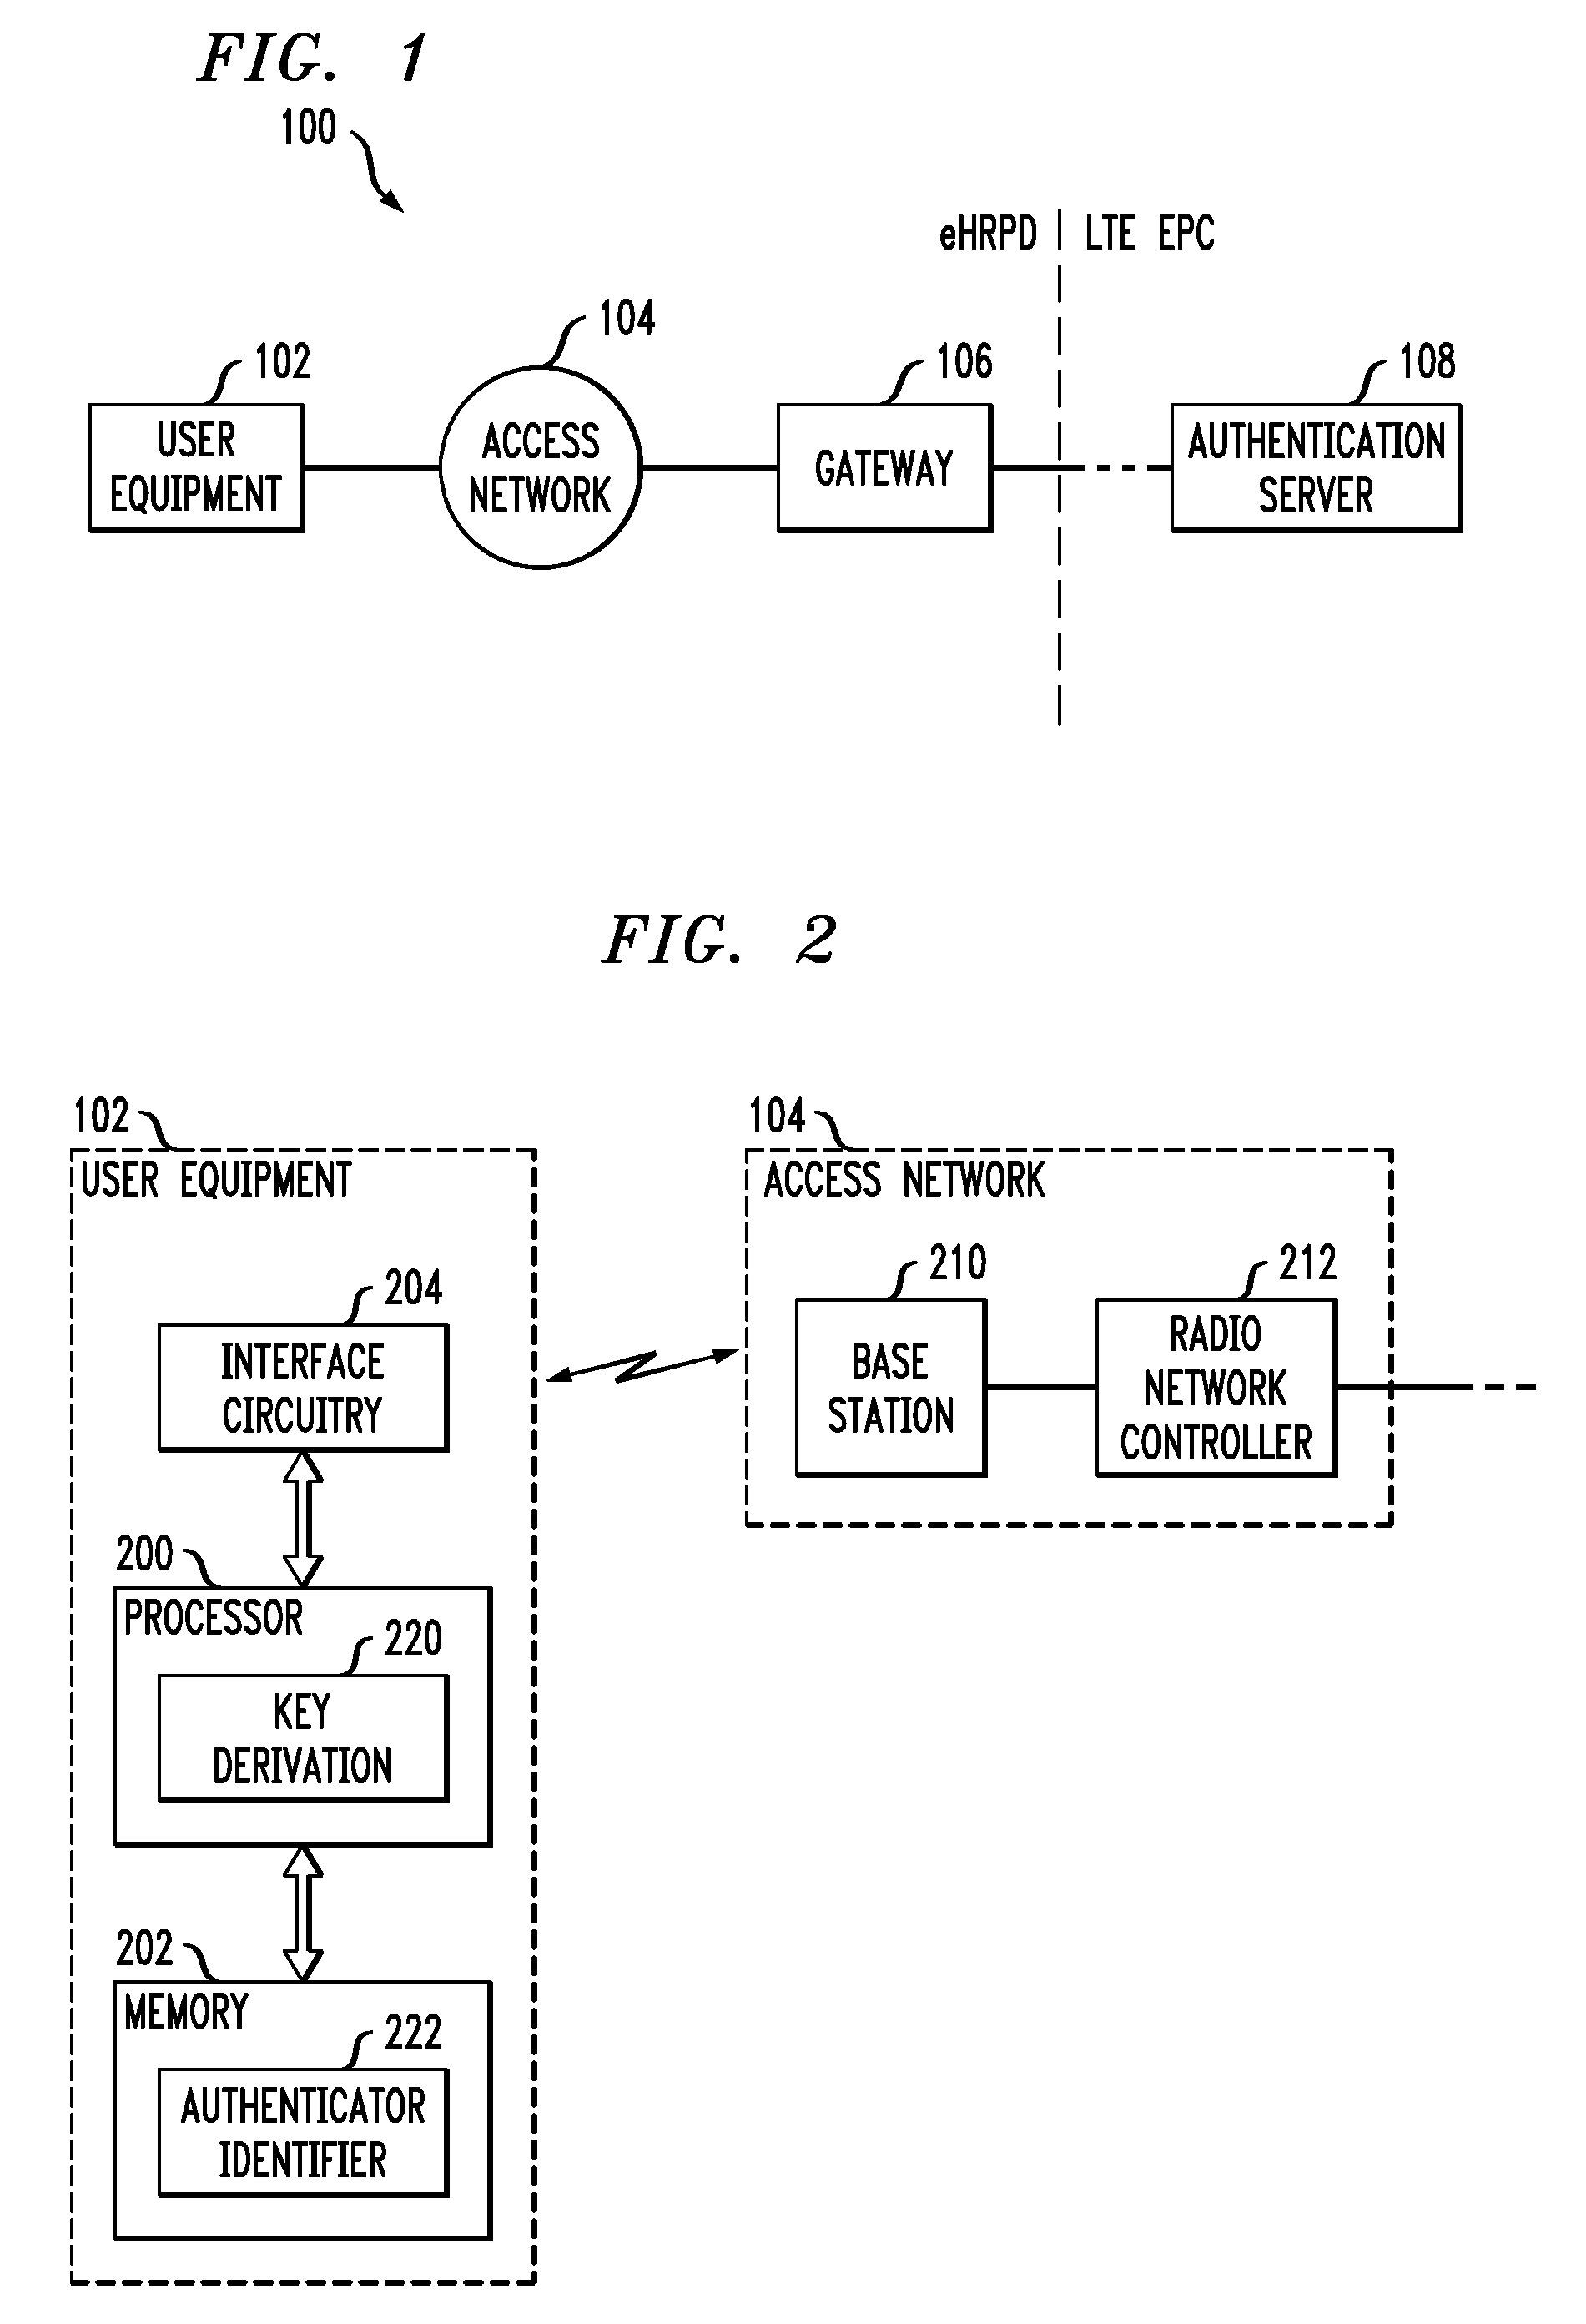 Communication of Session-Specific Information to User Equipment from an Access Network